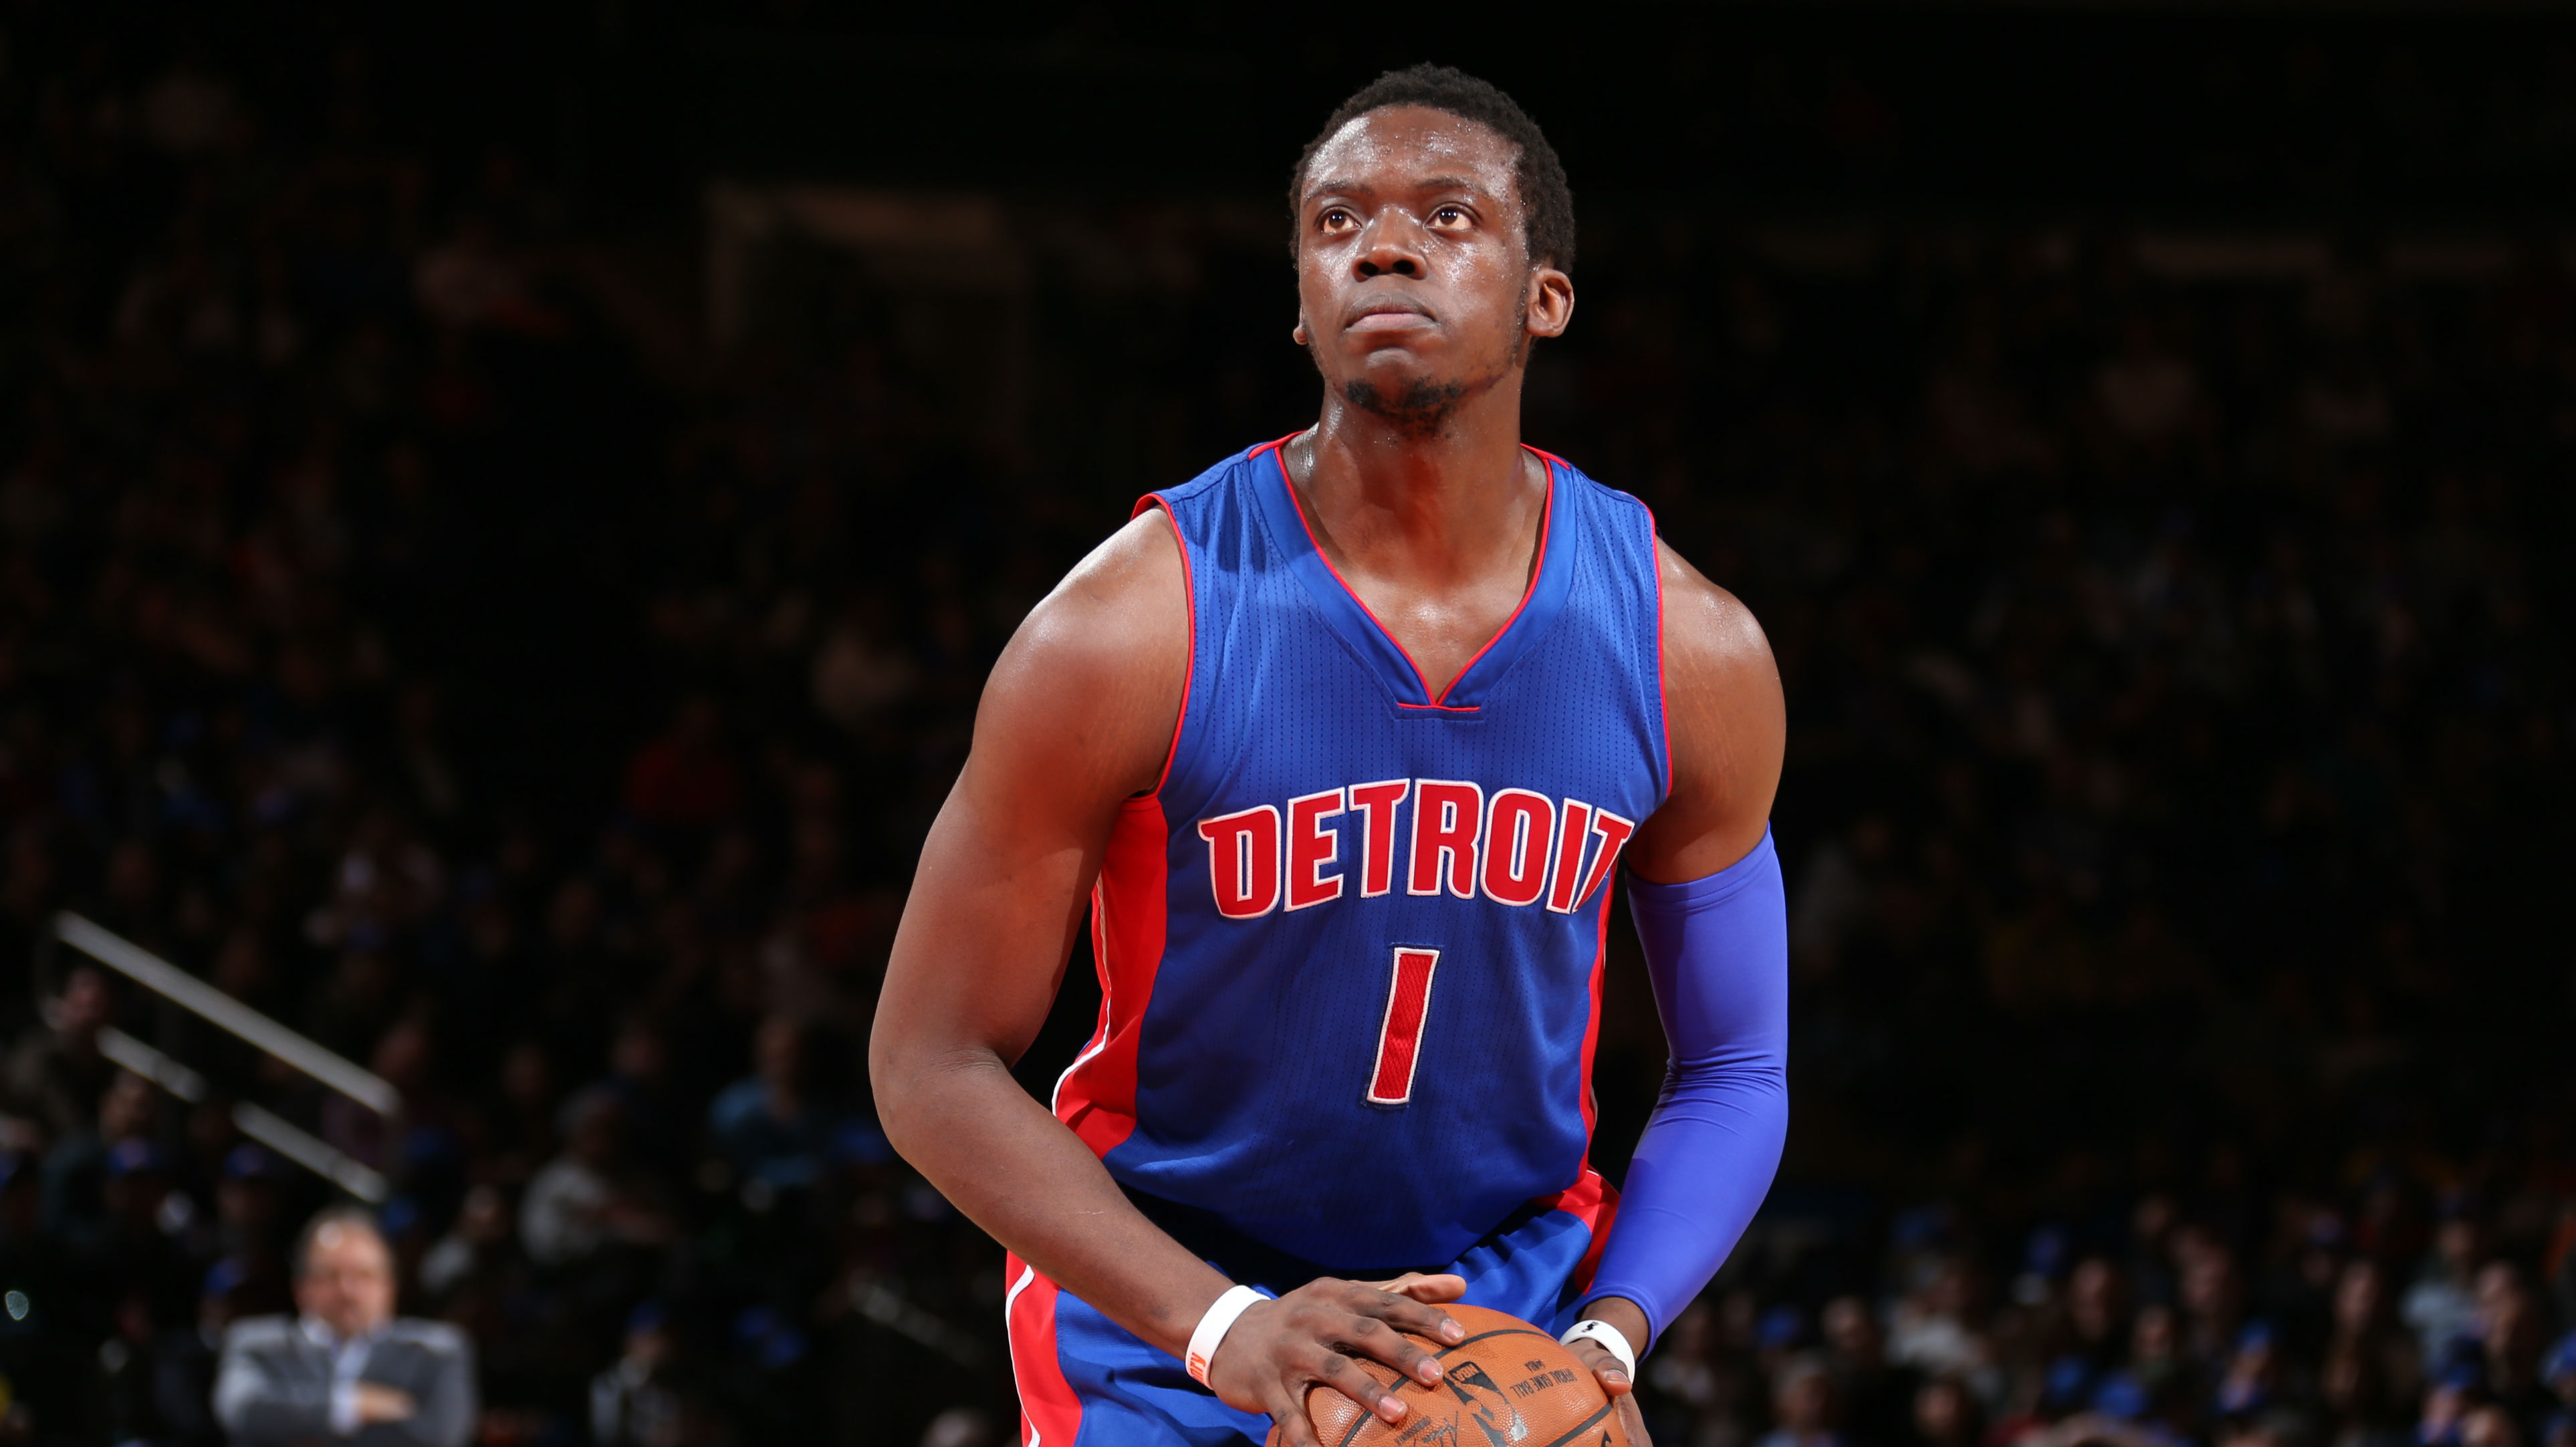 Reggie Jackson has agreed to a fiveyear, 80M extension with the